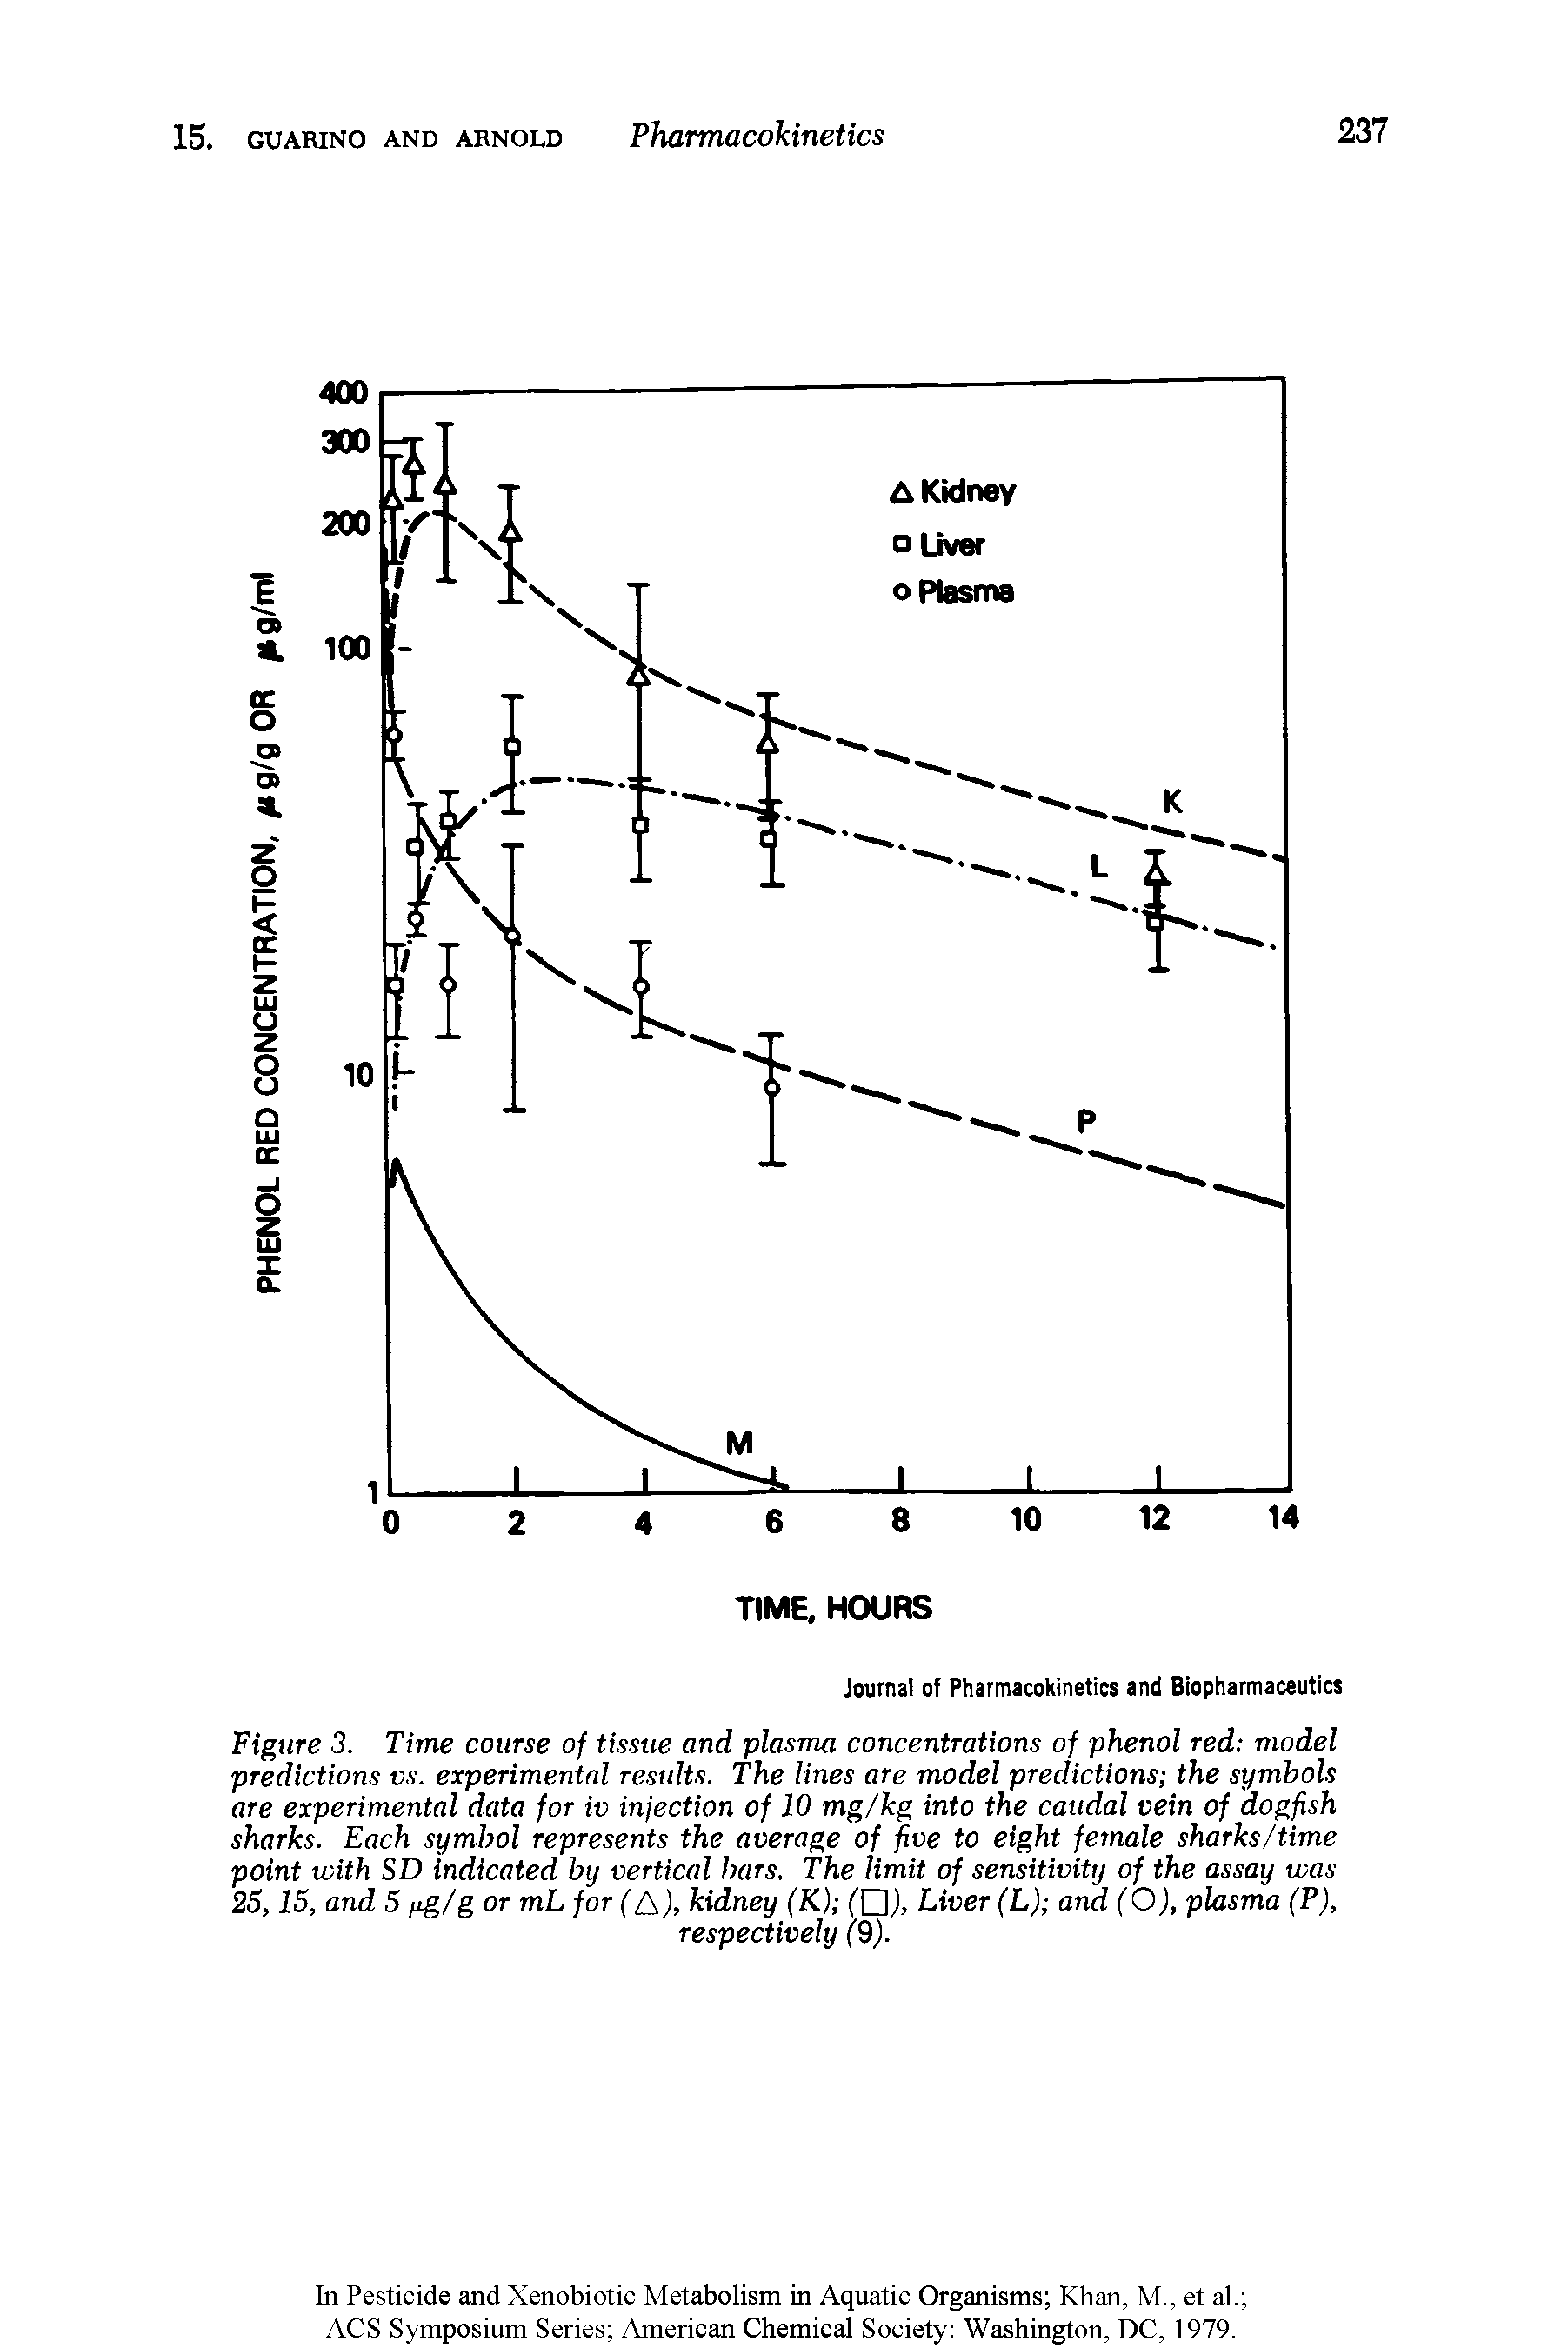 Figure 3. Time course of tissue and plasma concentrations of phenol red model predictions vs. experimental results. The lines are model predictions the symbols are experimental data for iv injection of 10 mg/kg into the caudal vein of dogfish sharks. Each symbol represents the average of five to eight female sharks/time point with SD indicated by vertical bars. The limit of sensitivity of the assay was 25,15, and 5 g/g or mL for ( ), kidney (K) Liver (L) and (O), plasma (P),...